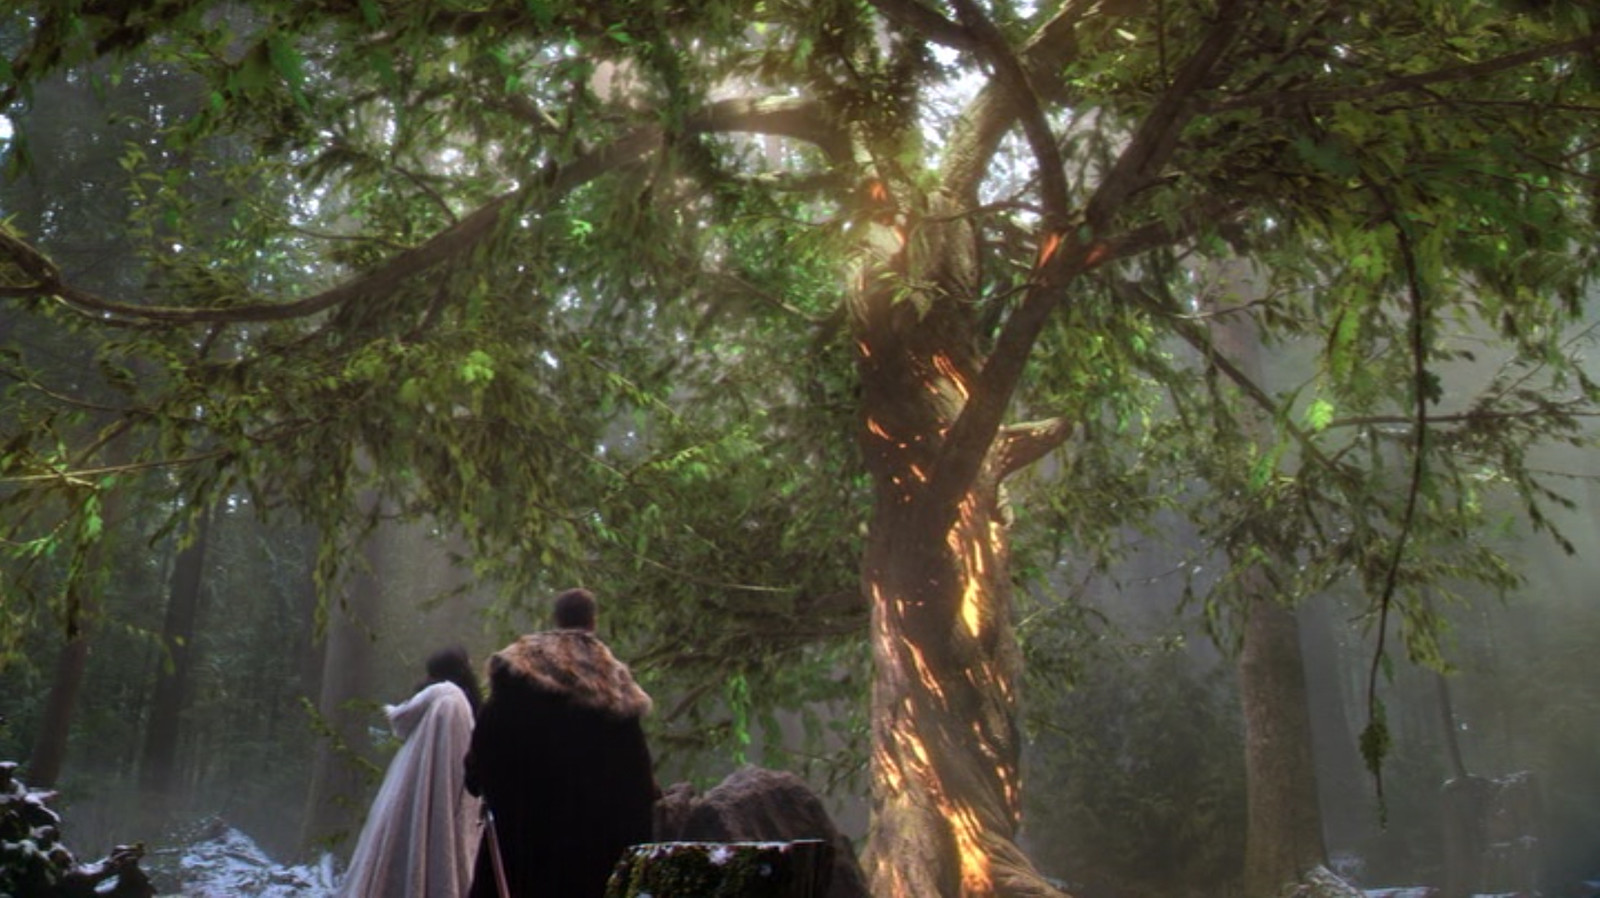 Tree of Wisdom Effect - Once Upon  a Time Season 4 - Final Shot by ZOIC Studios